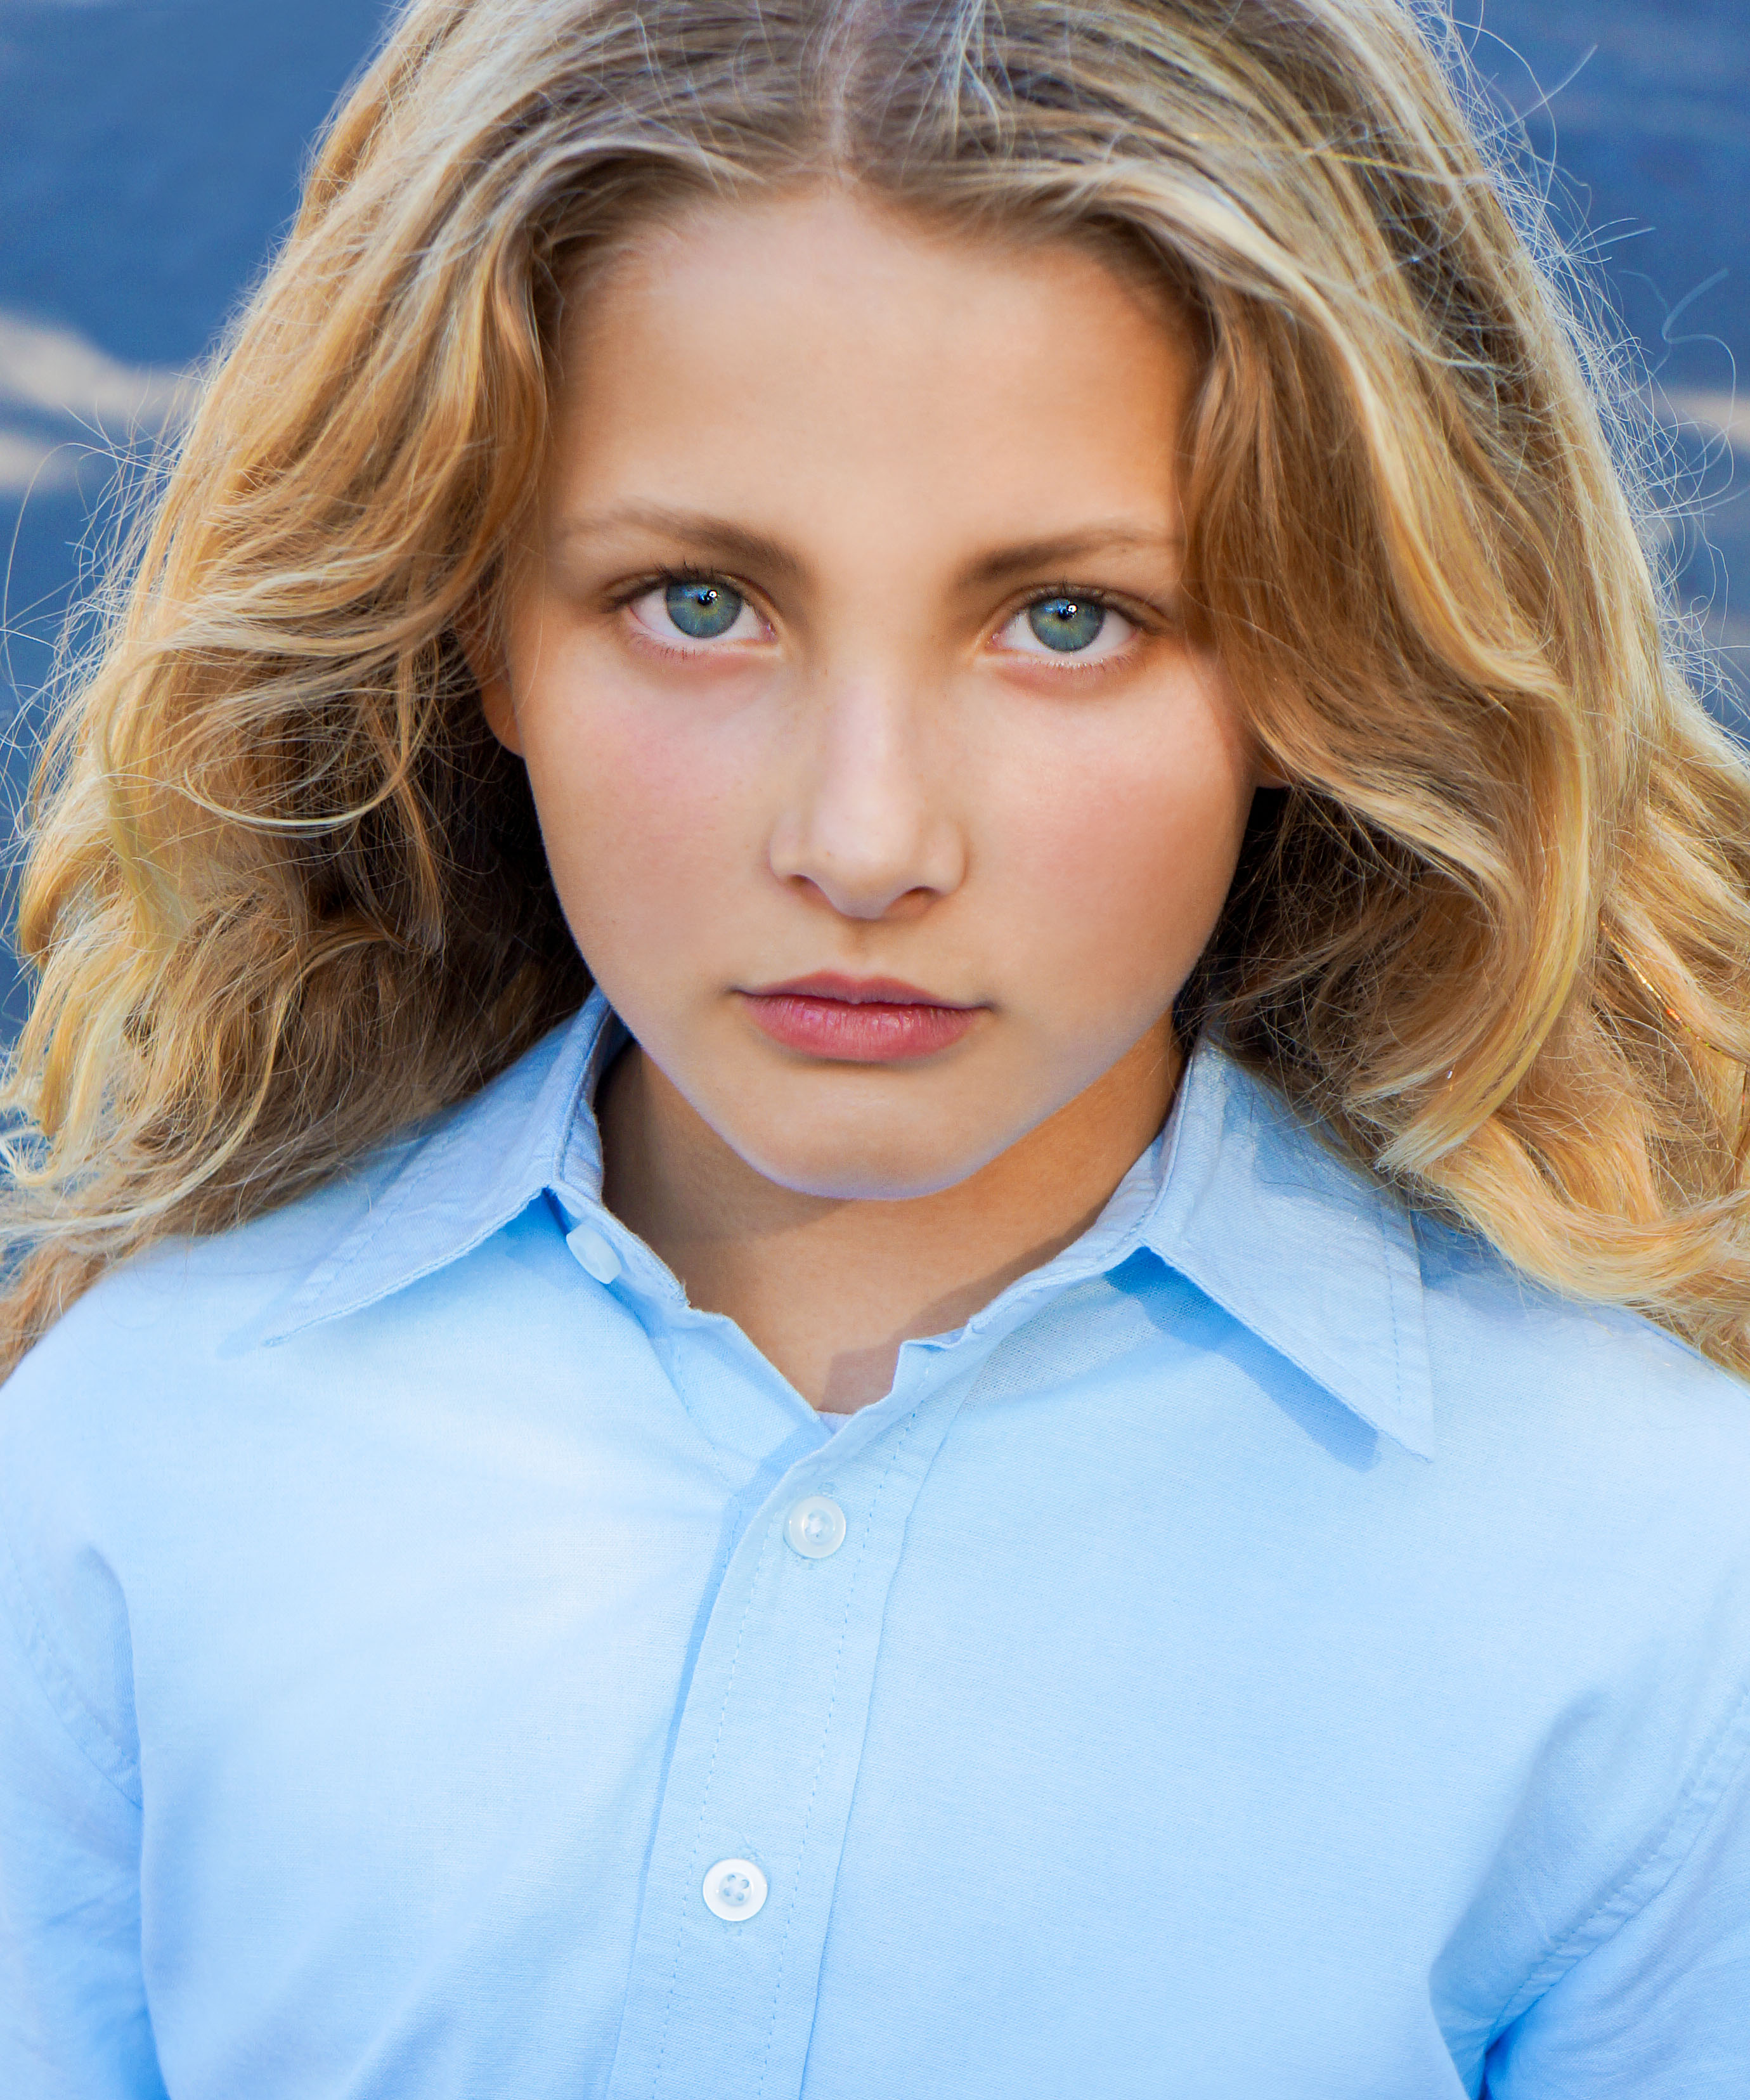 Ryan Baumann (Age 9, Oct. 2014) PHOTO IS RETOUCHED